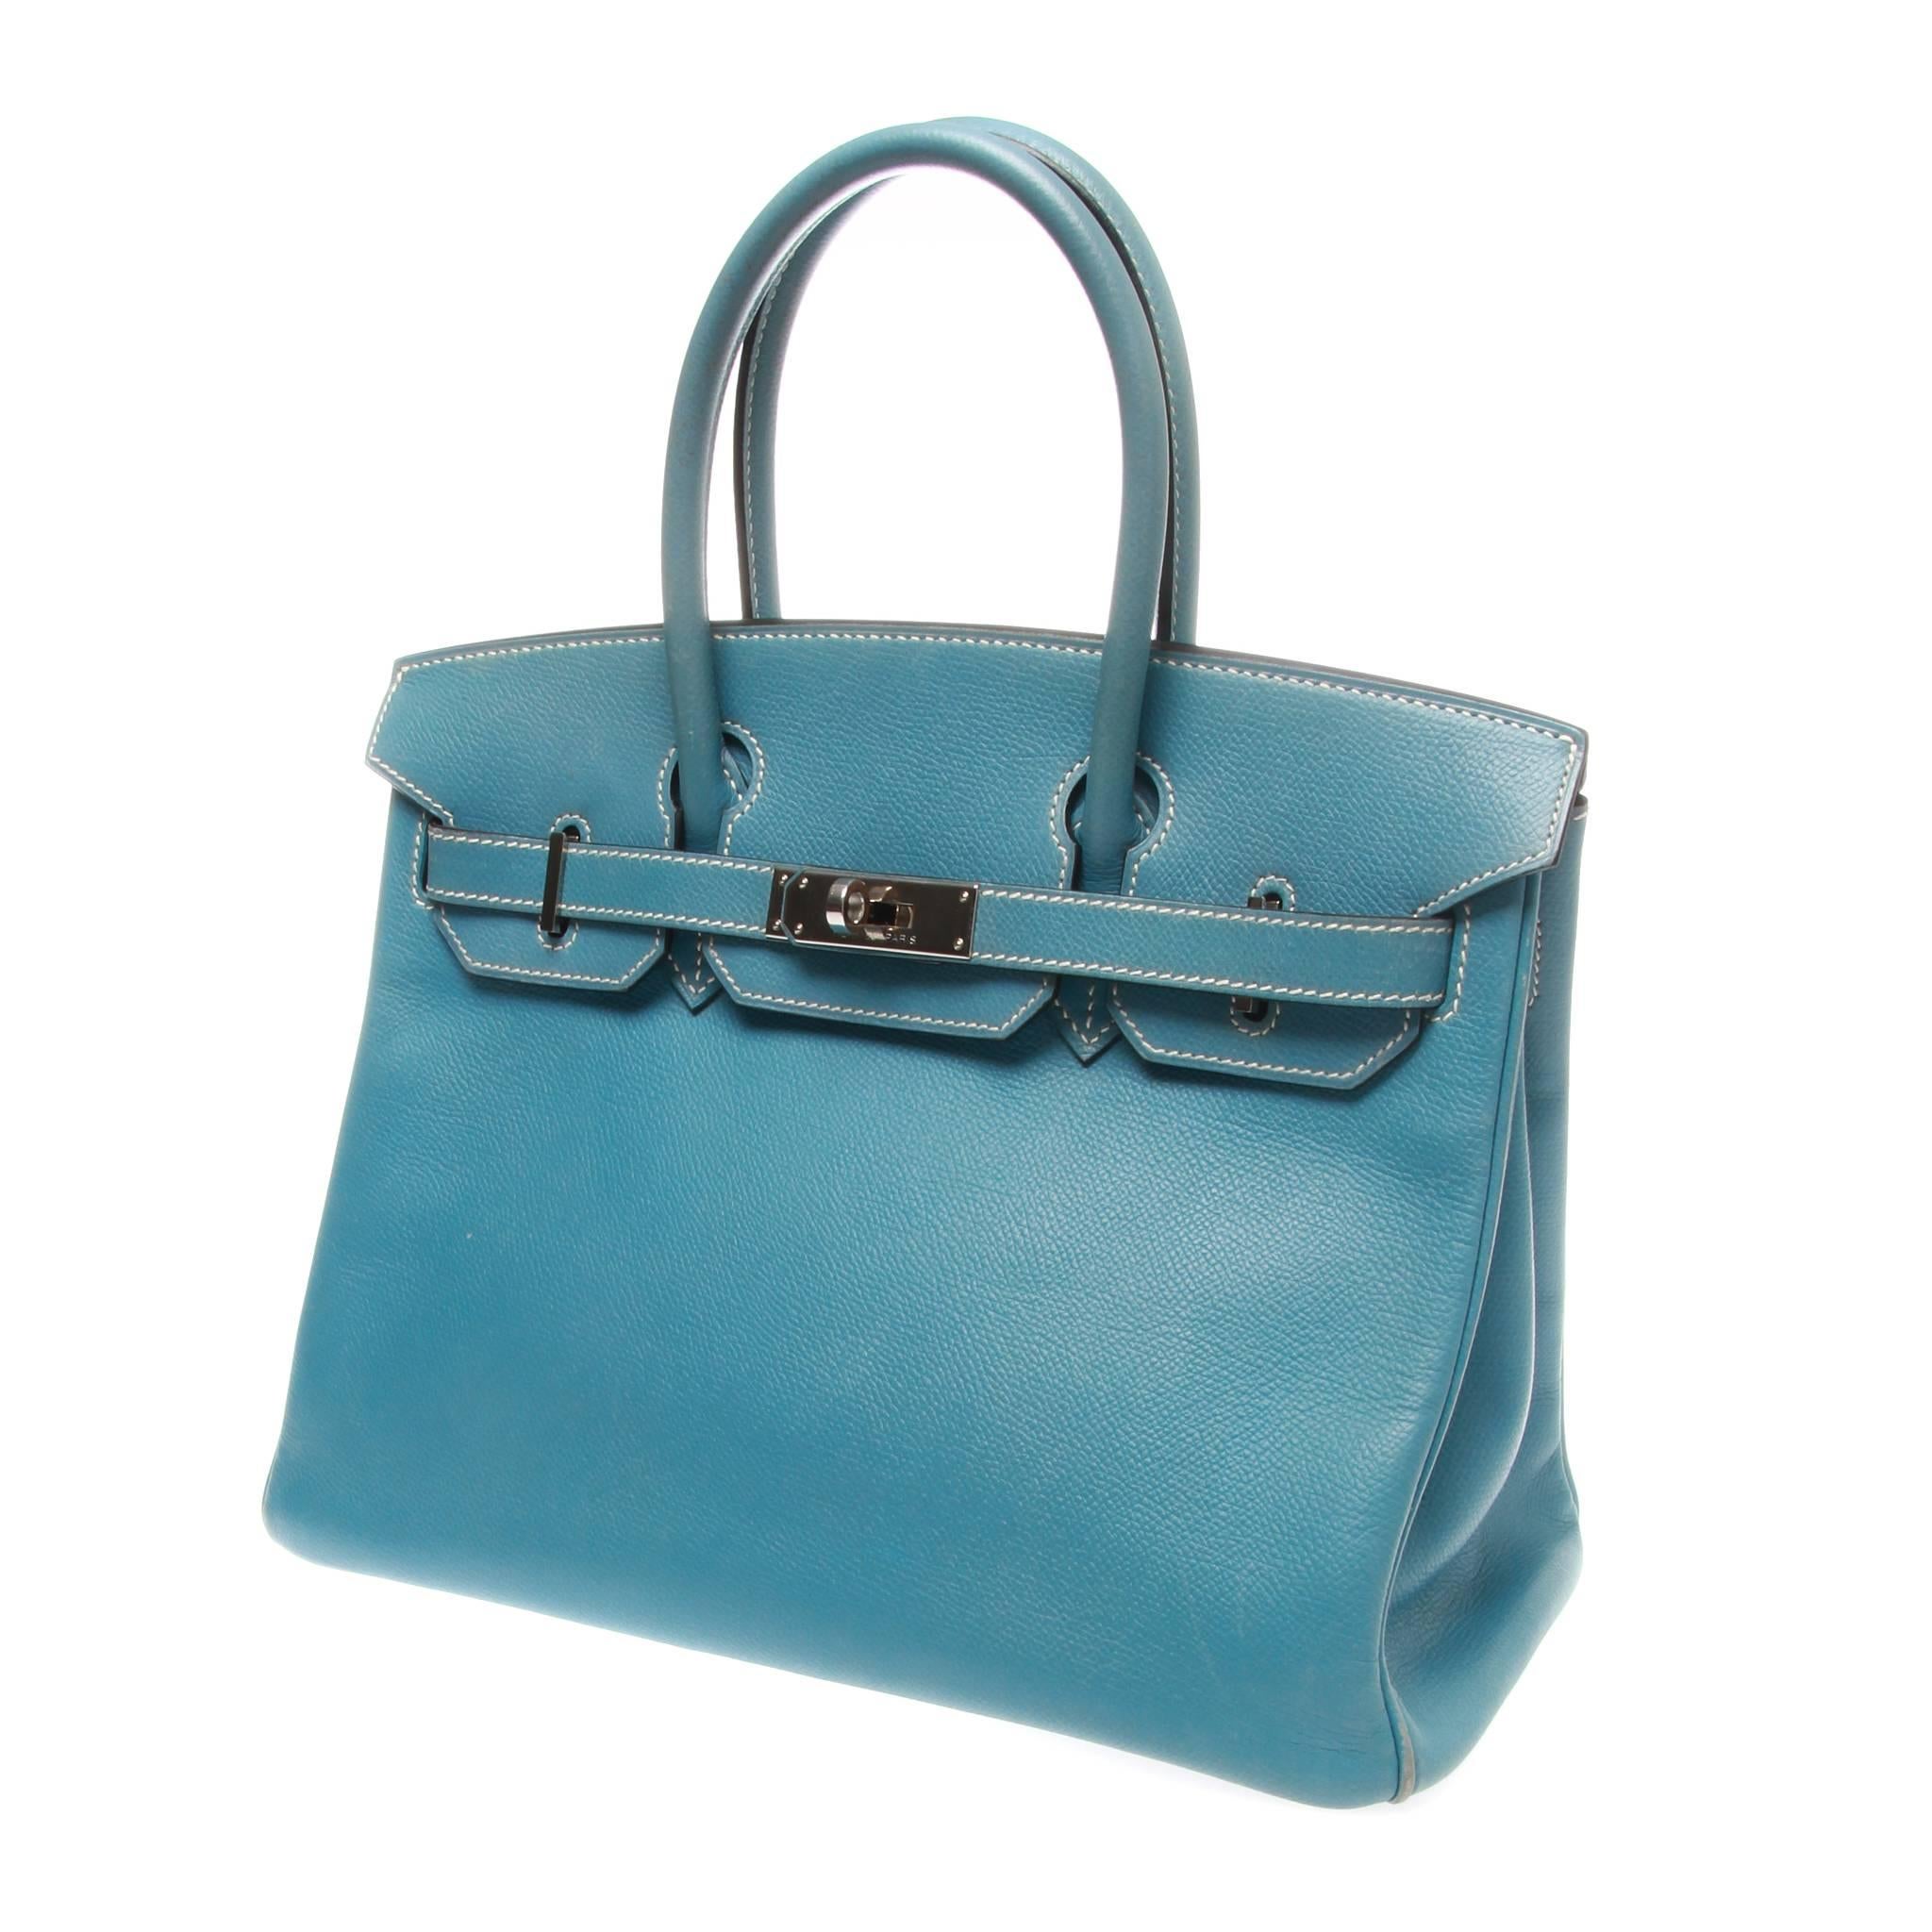 Hermès 30 Togo Blue Jean PHW Leather Birkin Handbag

A pristine-rare Hermès togo Blue Jean PHW Leather Top Handle Handbag.
Togo leather is a beautiful leather with fine grain that completely resilient to scratching.
Making it the perfect carrier for